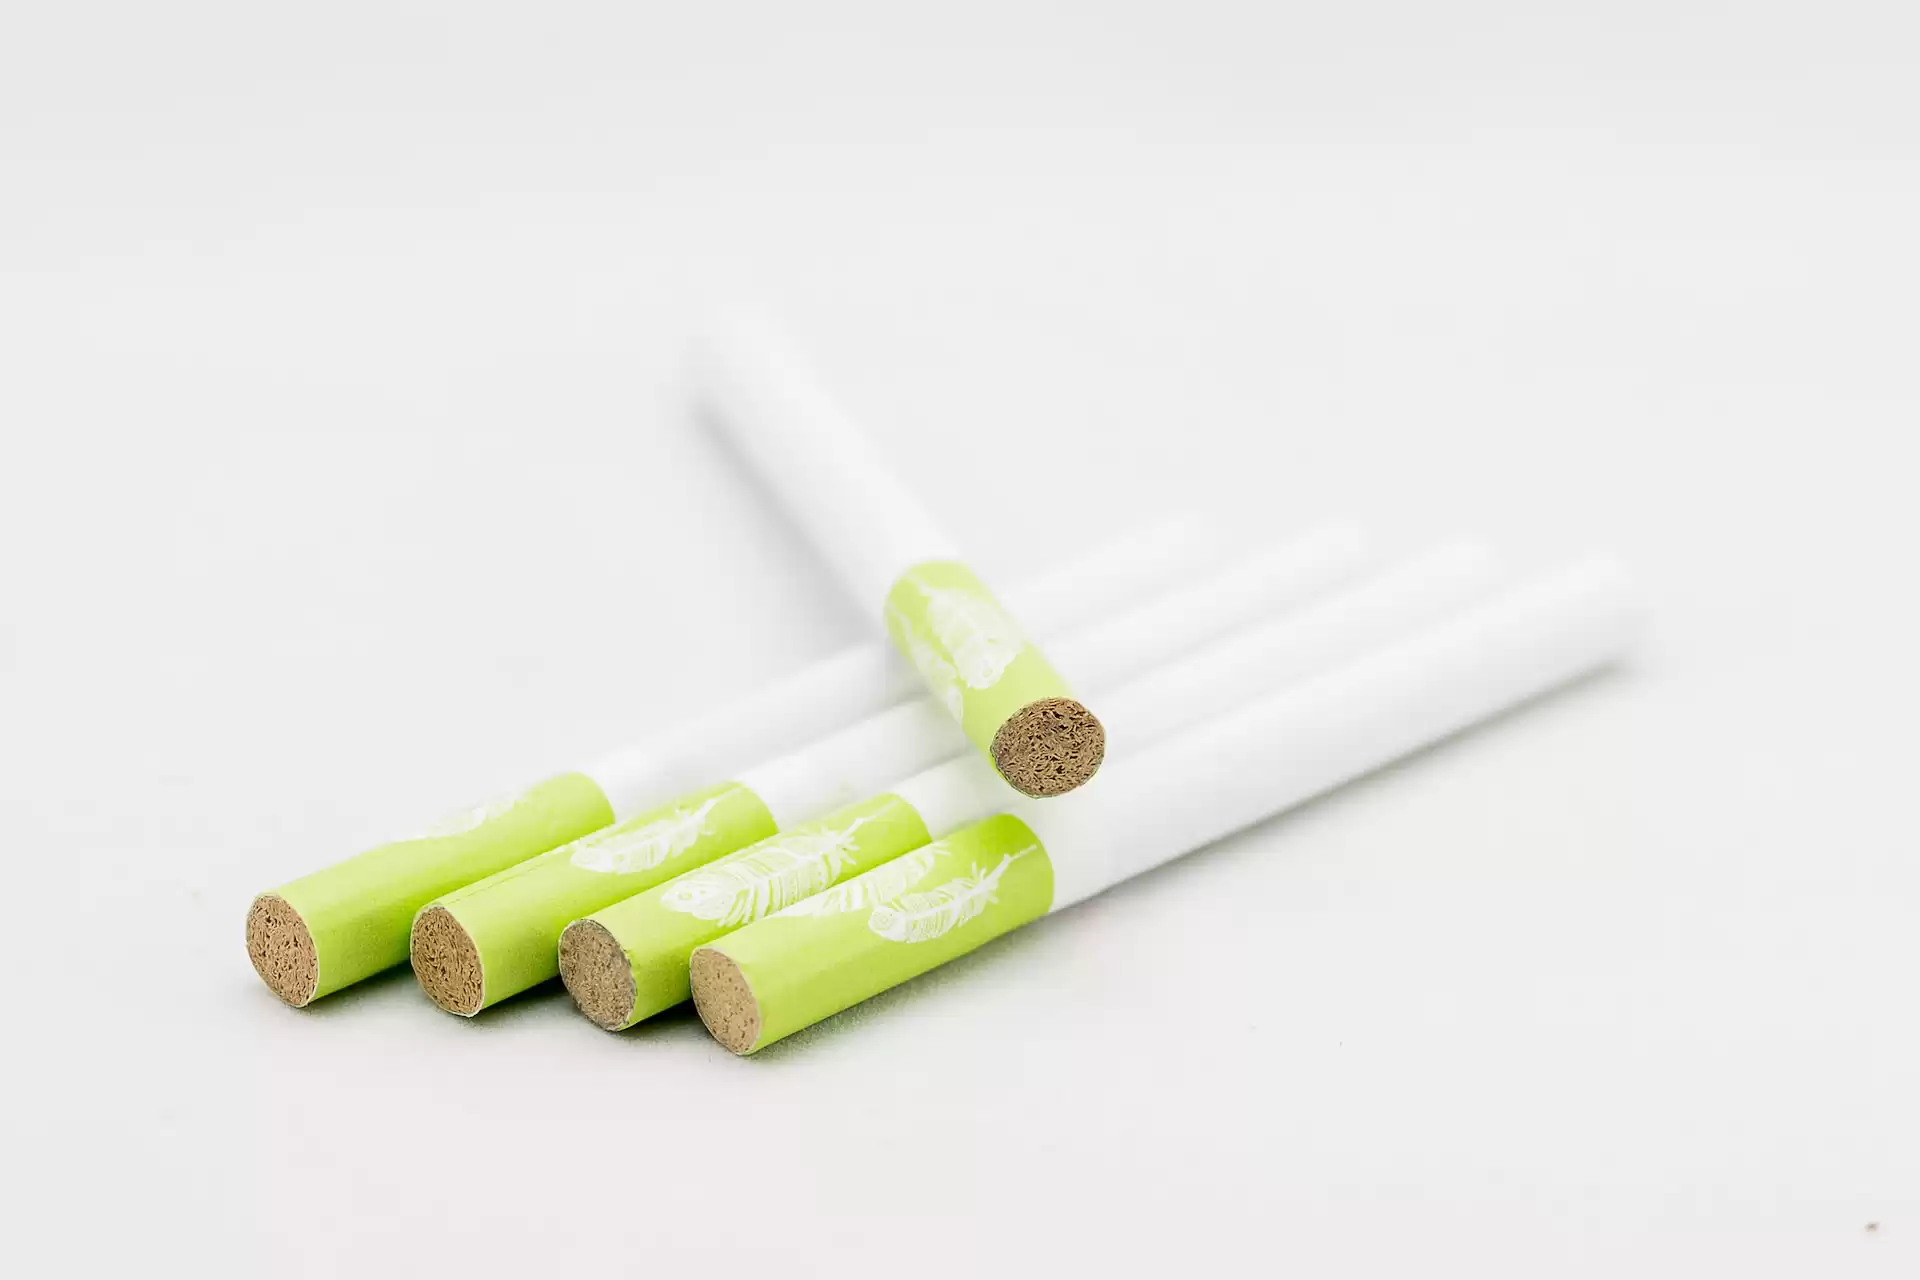 The Ultimate Guide to Doob Tubes